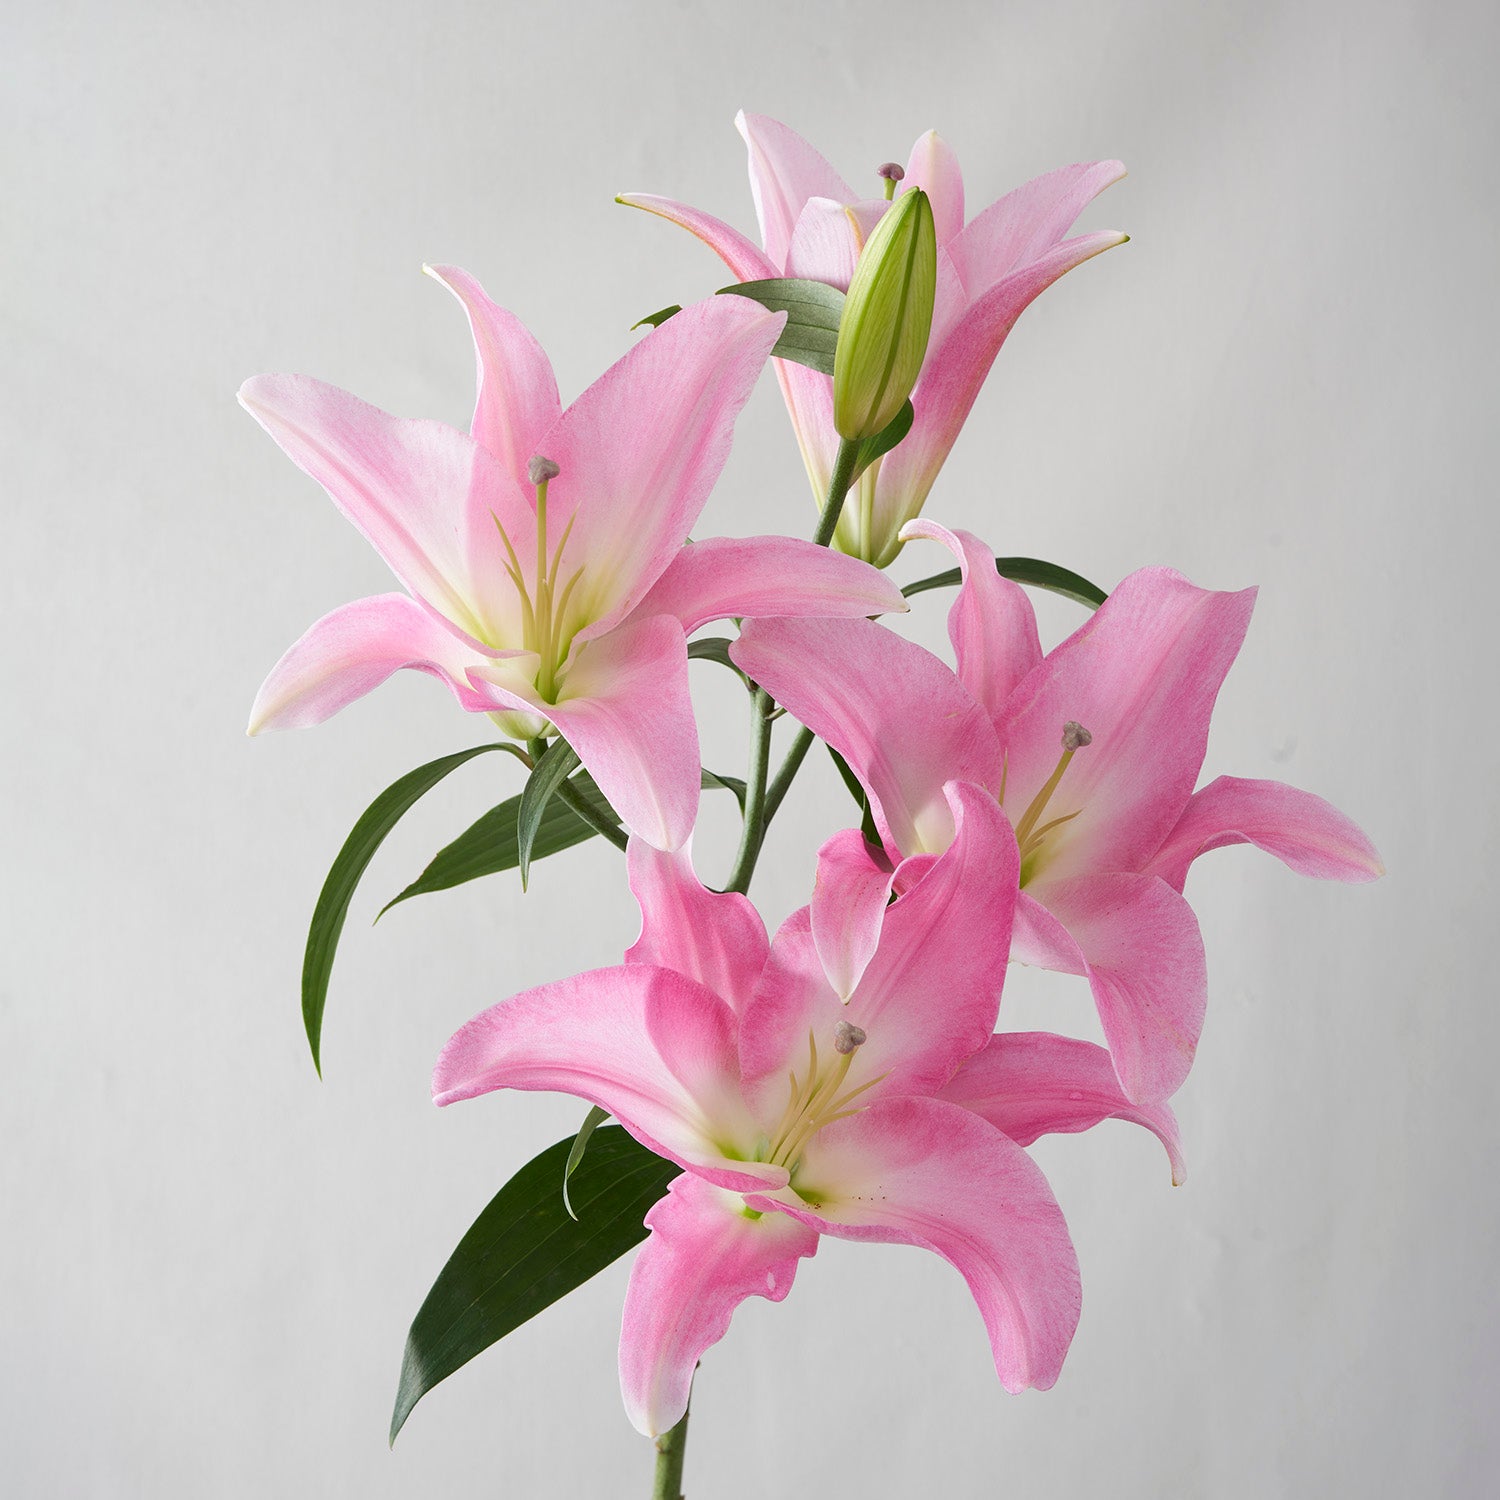 Large stem of open, pink, fragrant, lilies.